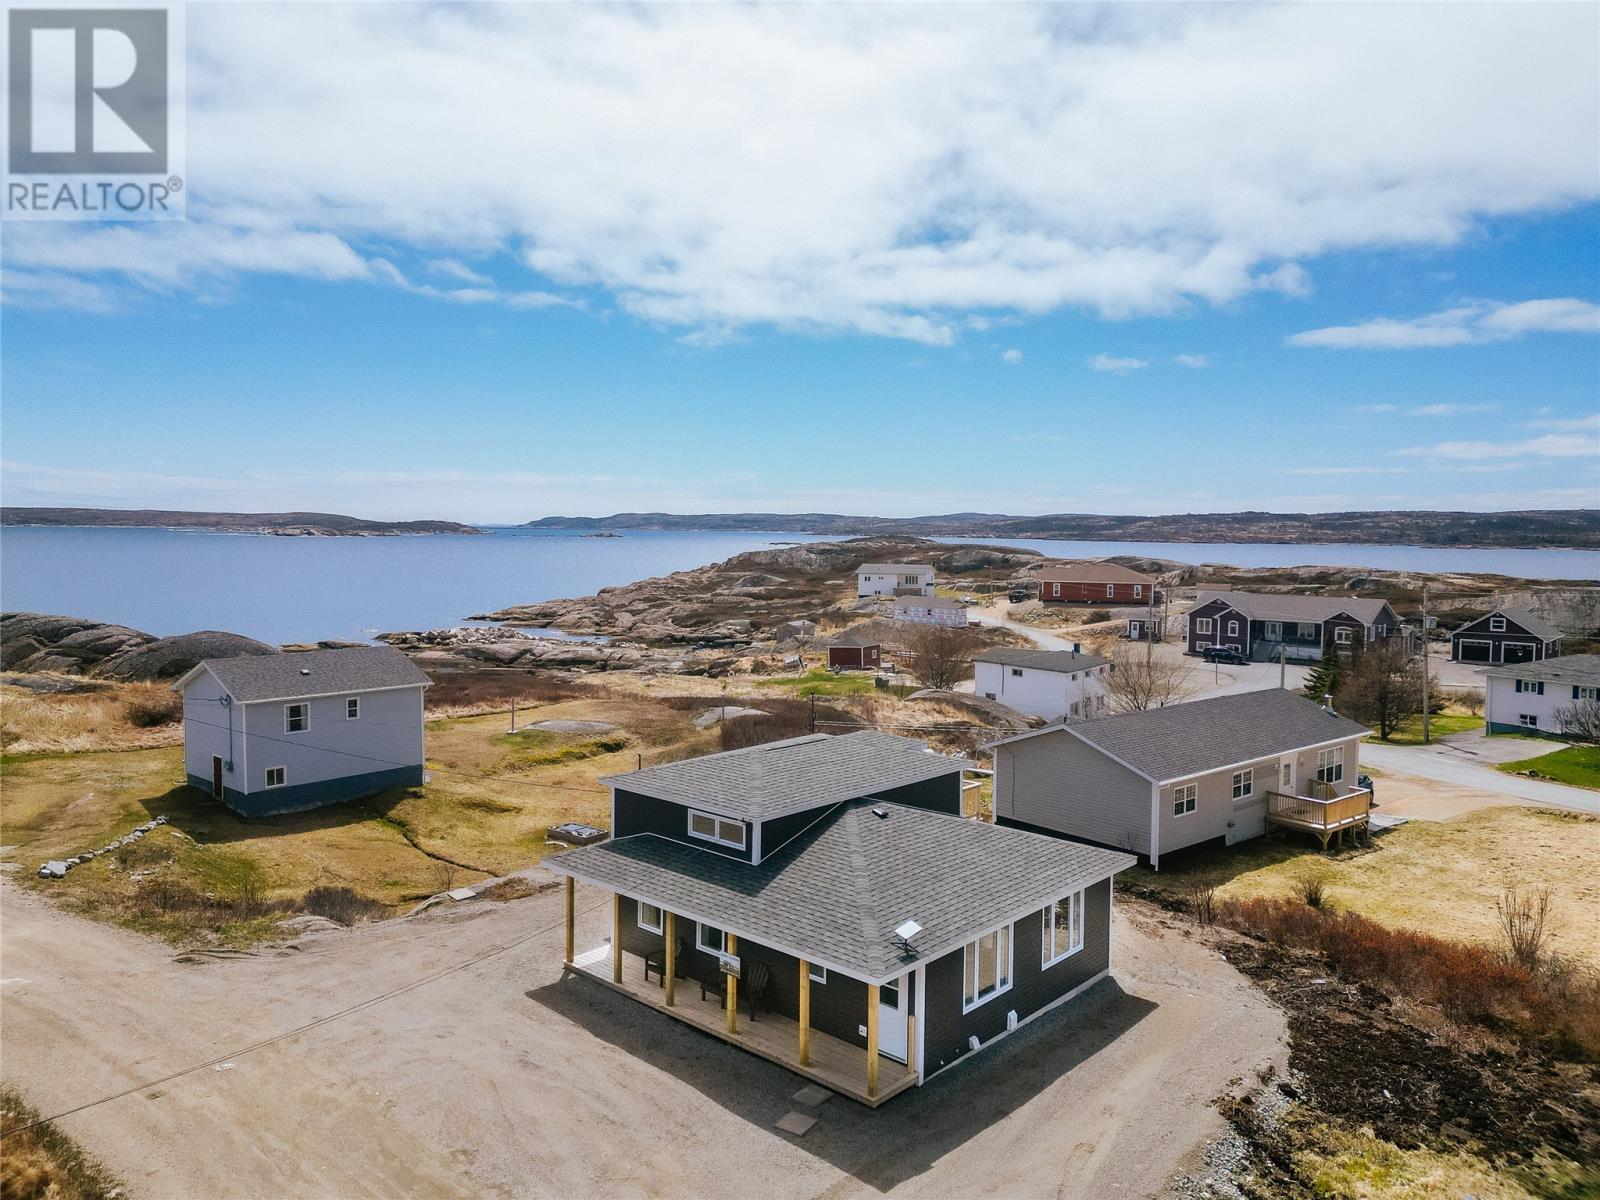 4 Rogers Road located in Pool's Island, Newfoundland and Labrador